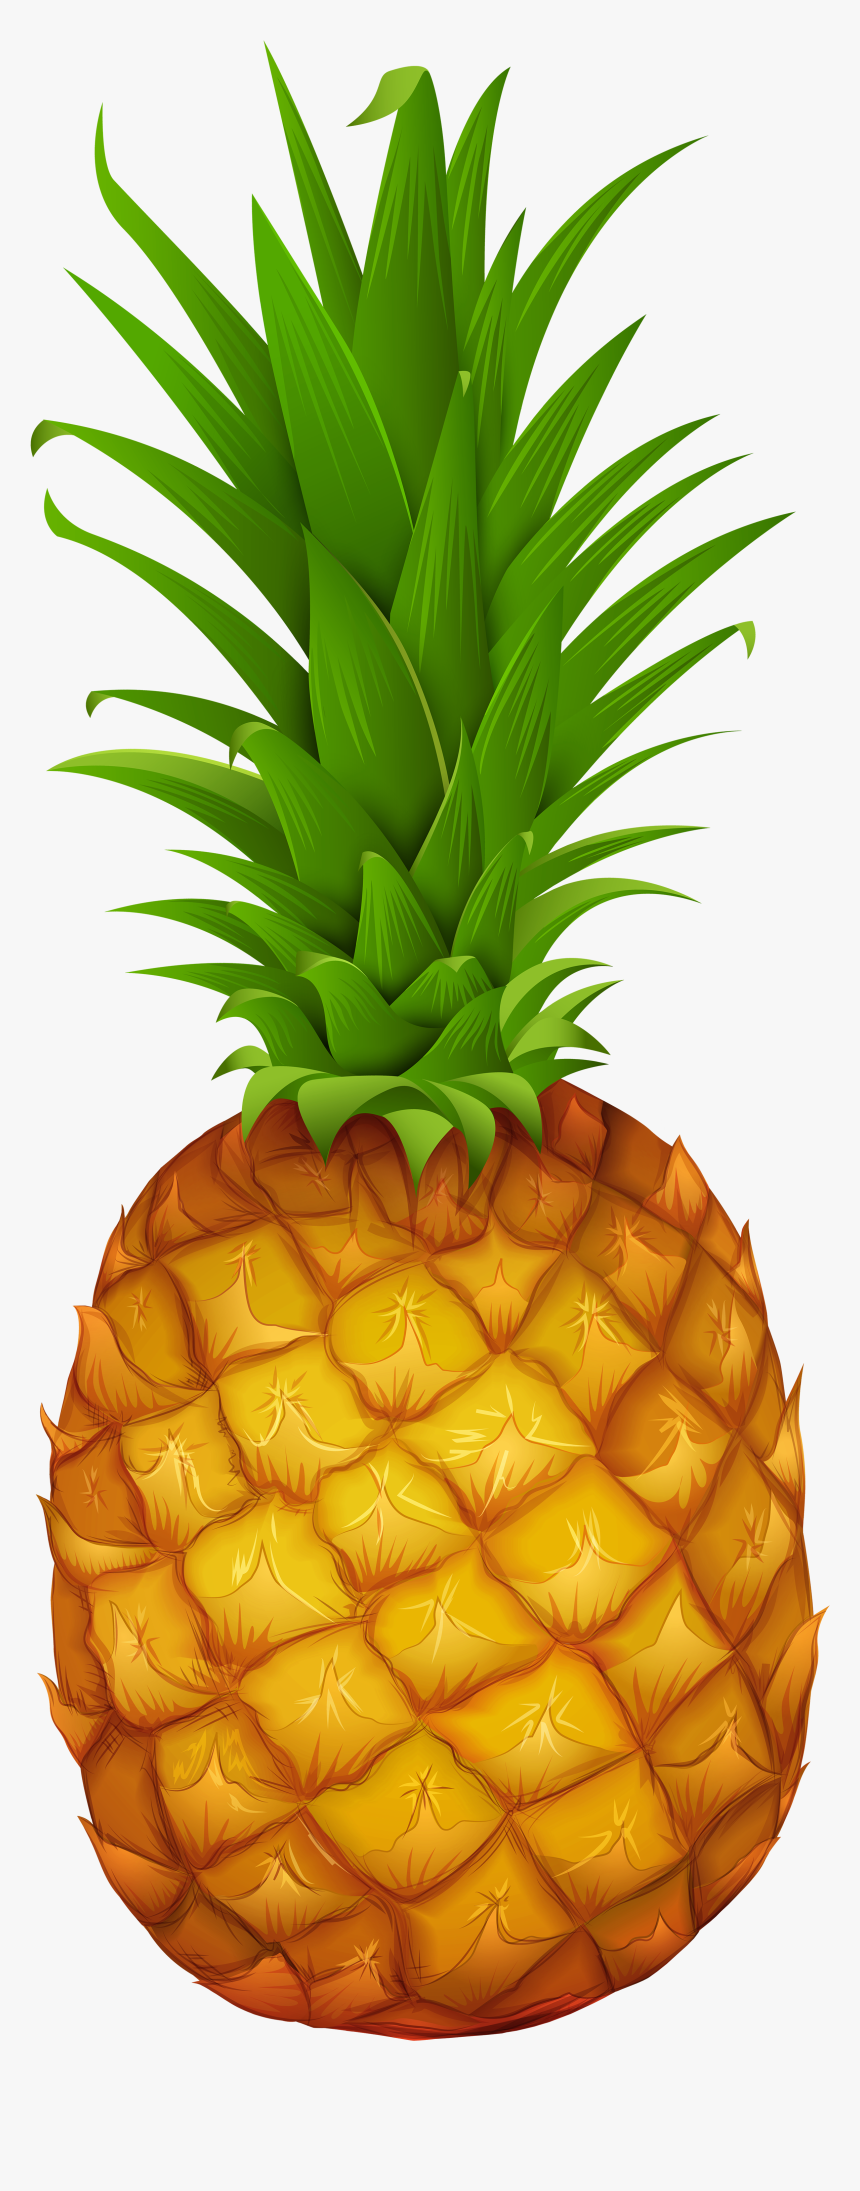 Clip Art Pineapple Gallery Yopriceville High - Clip Art Pineapple Png